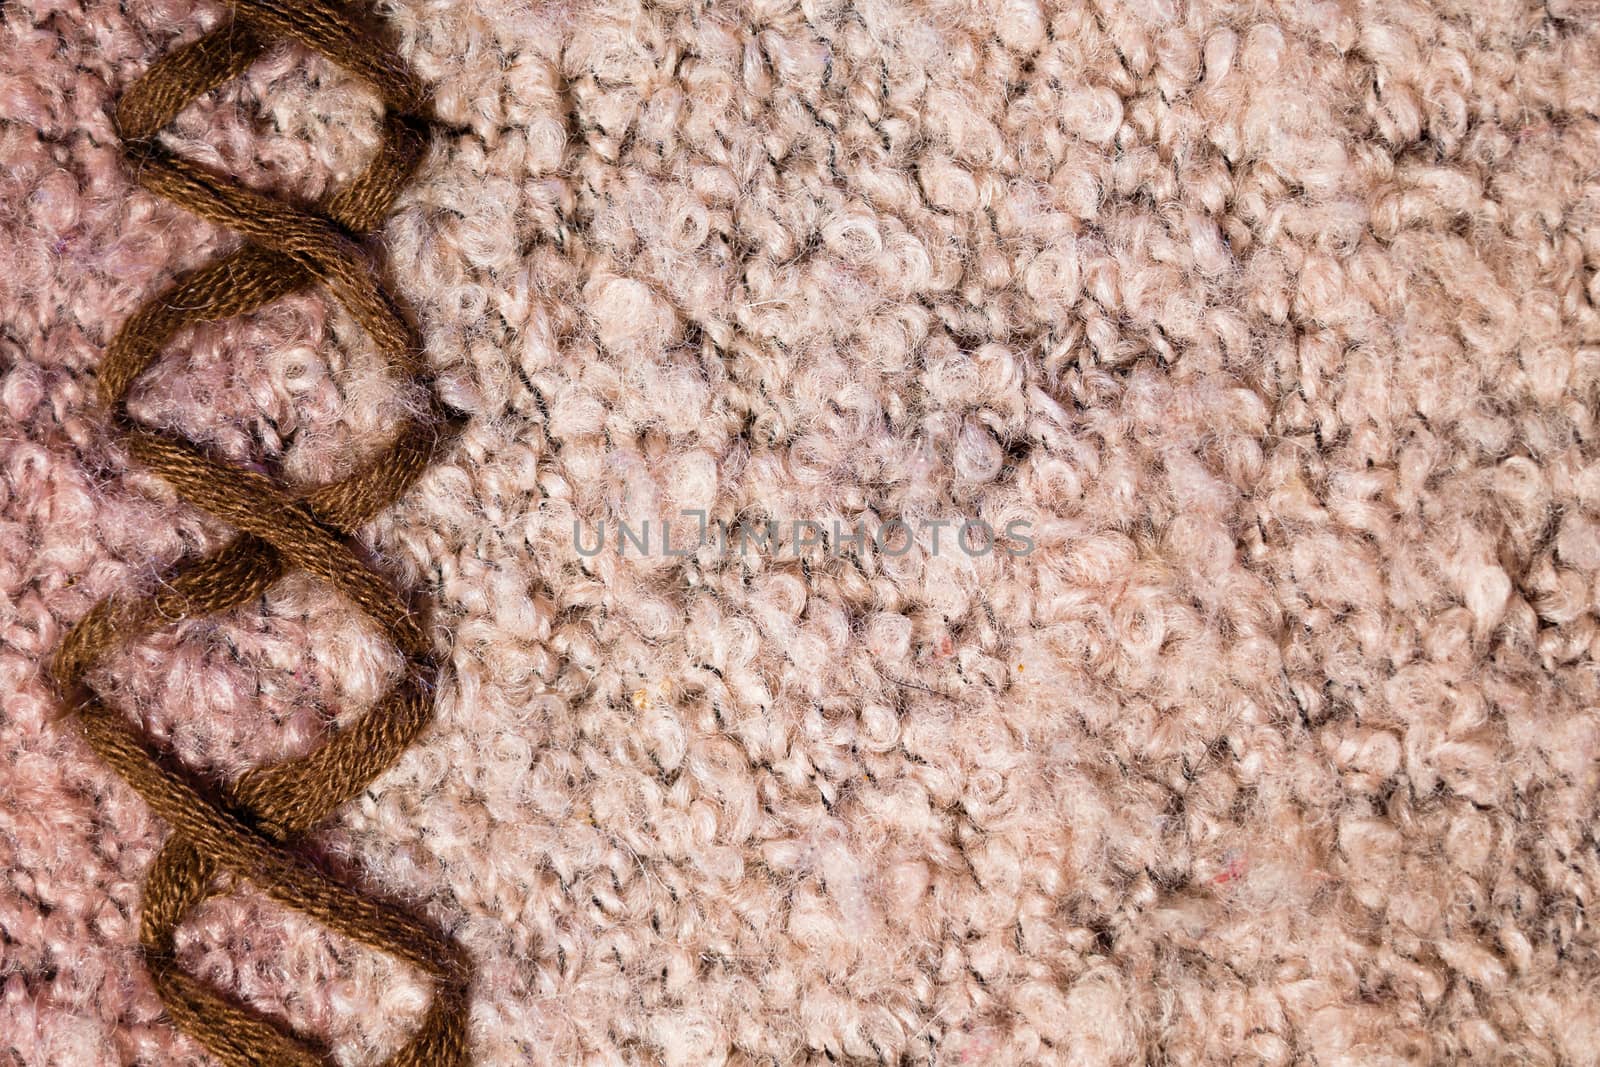 Part of the surface of warm sweaters. macro photography